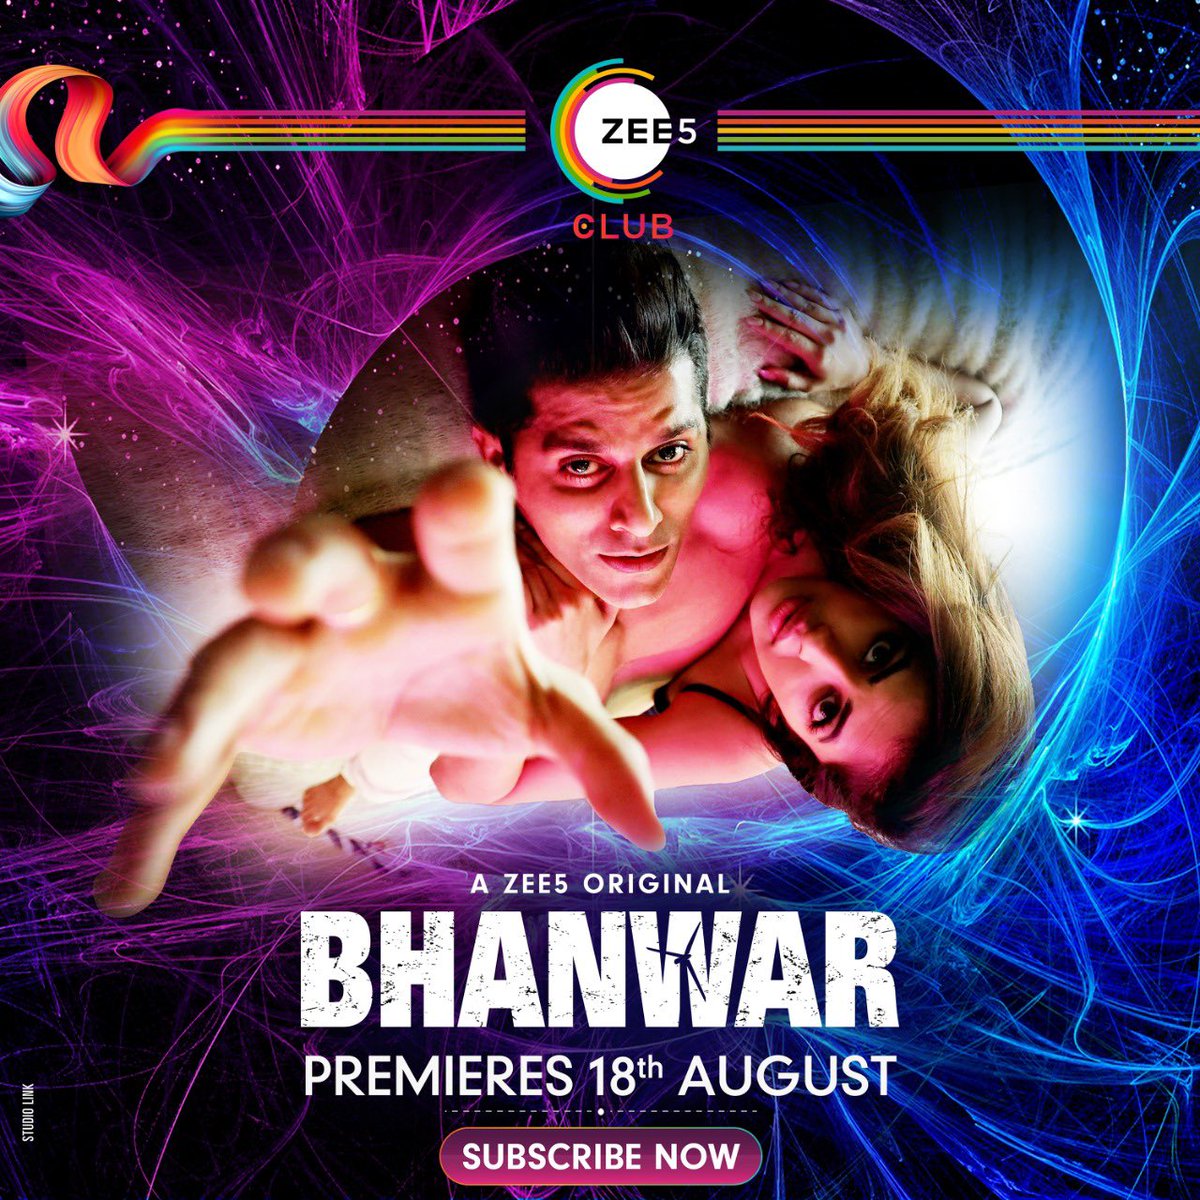 Find out what happens when you try to change the future in #Bhanwar #SamayKaJaal #timetravel Premieres 18th August only on @zee5premium @KVBohra and @TheRealPriya @mantramugdh @payalsodhi14 @bombaysunshine @KVB_ENT @deepakpachory